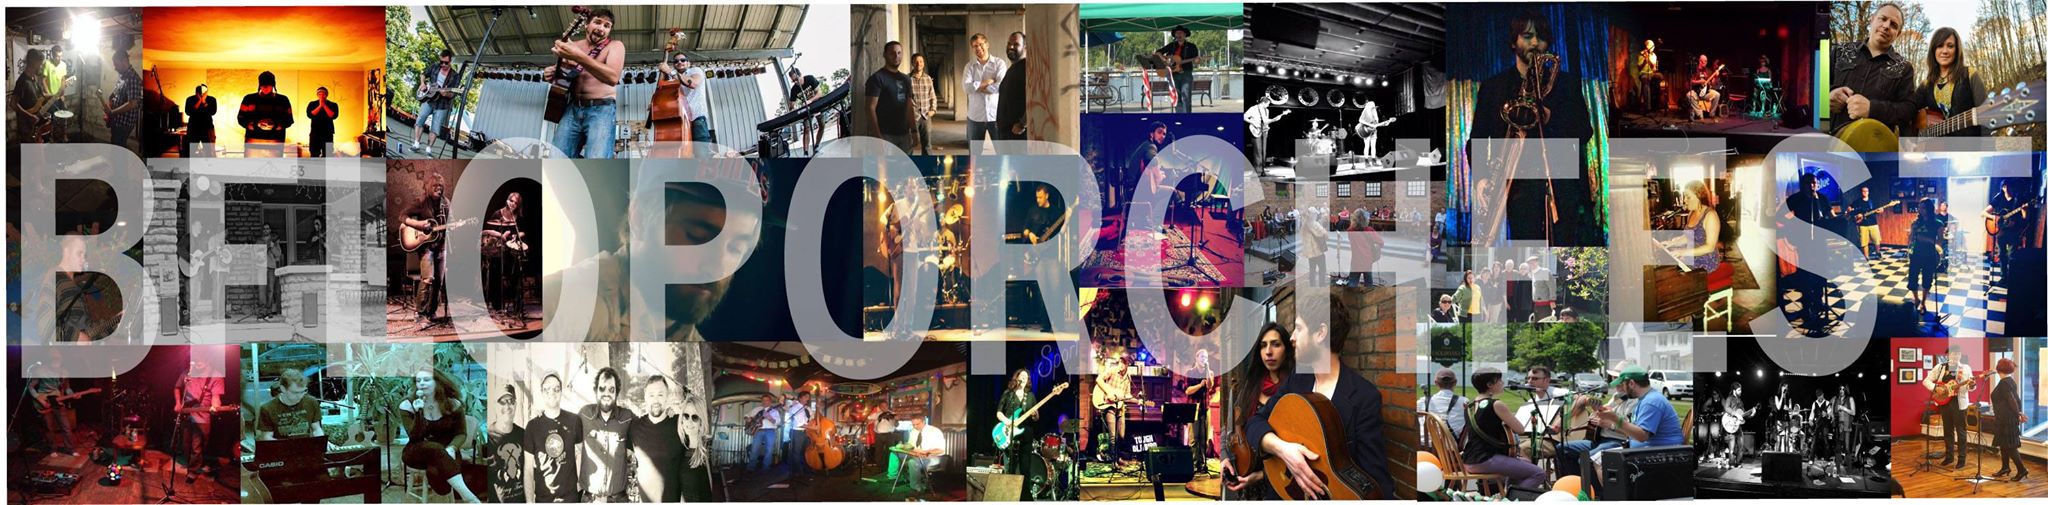 Buffalo Porchfest 2015 Calling all Bands and Porch Owners Buffalo Rising